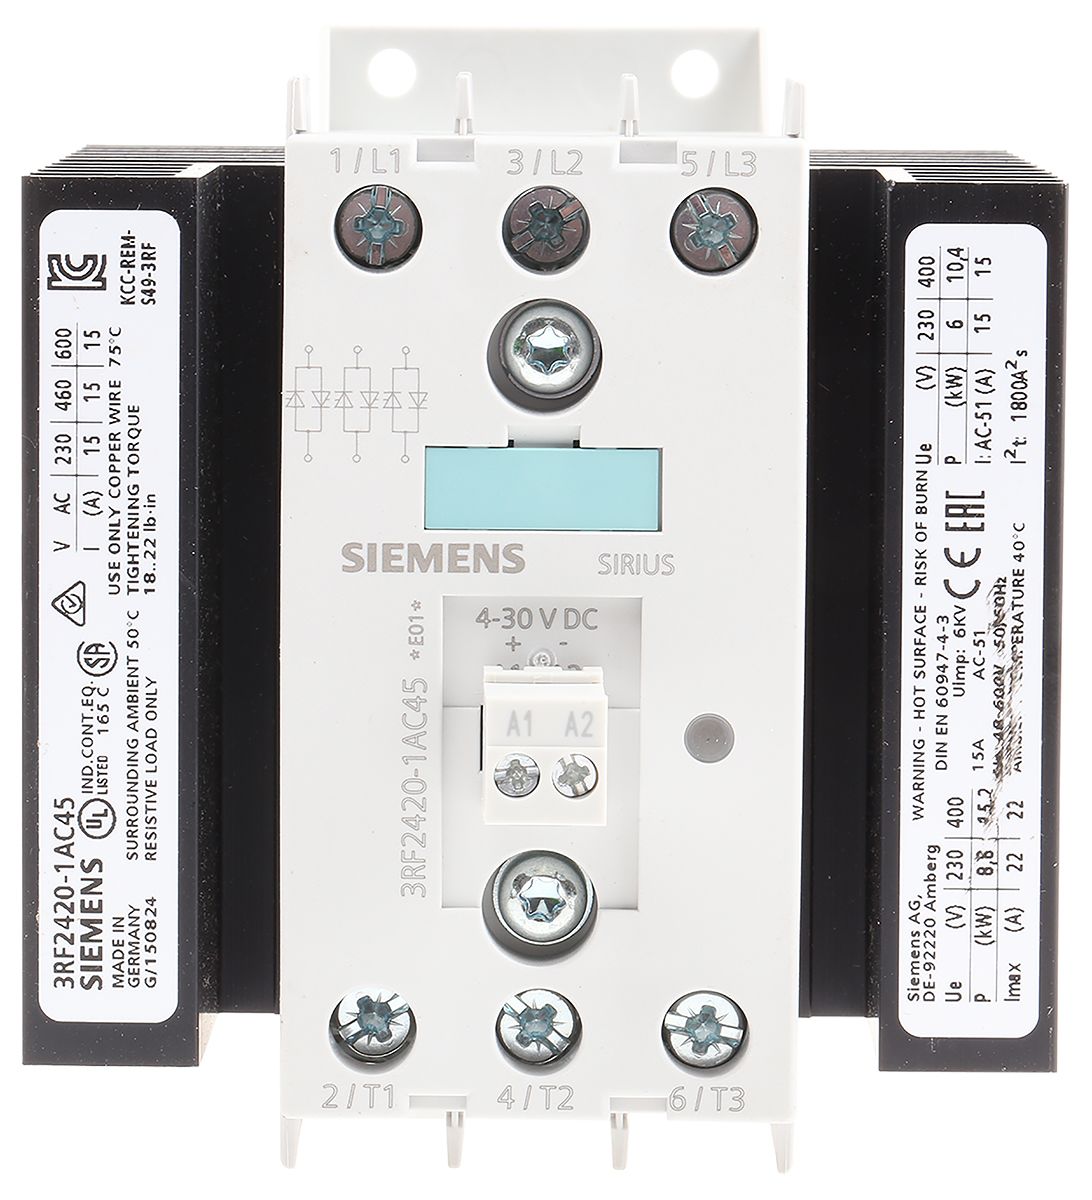 Siemens DIN Rail Solid State Relay, 20 A Max. Load, 600 V Max. Load, 30 V dc Max. Control